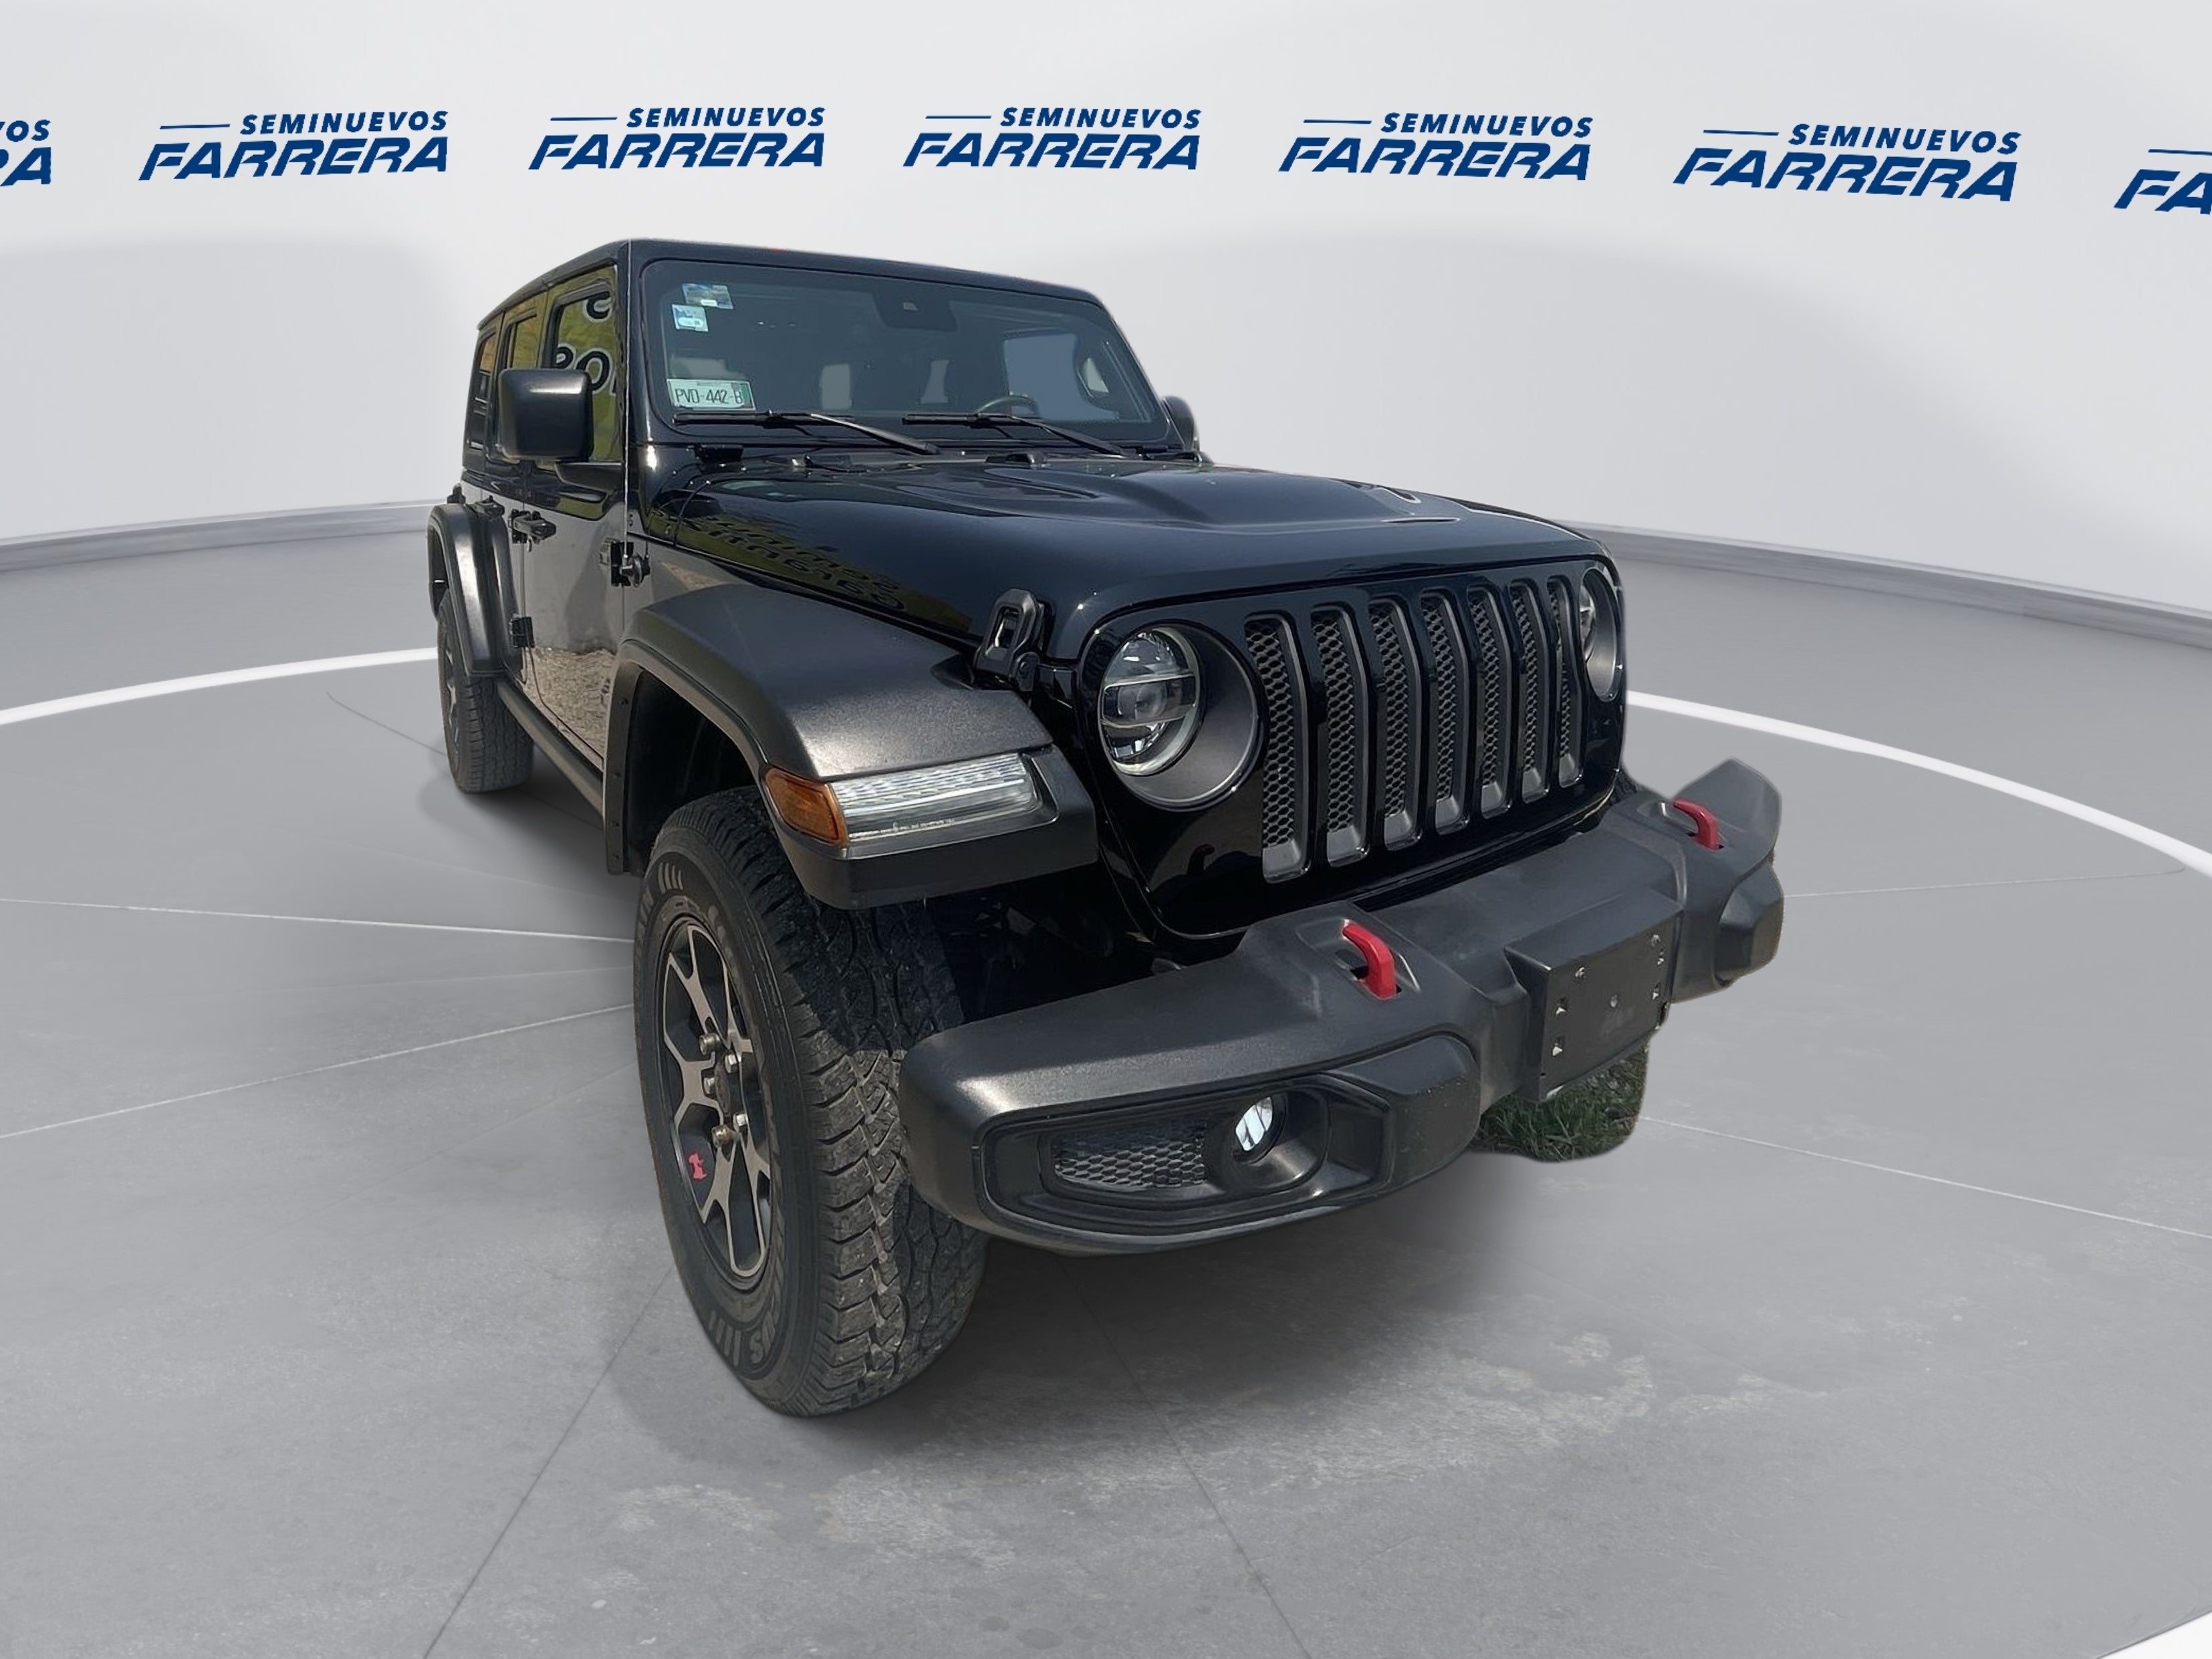 2019 Jeep Wrangler 3.7 Unlimited Rubicon 3.6 4x4 At